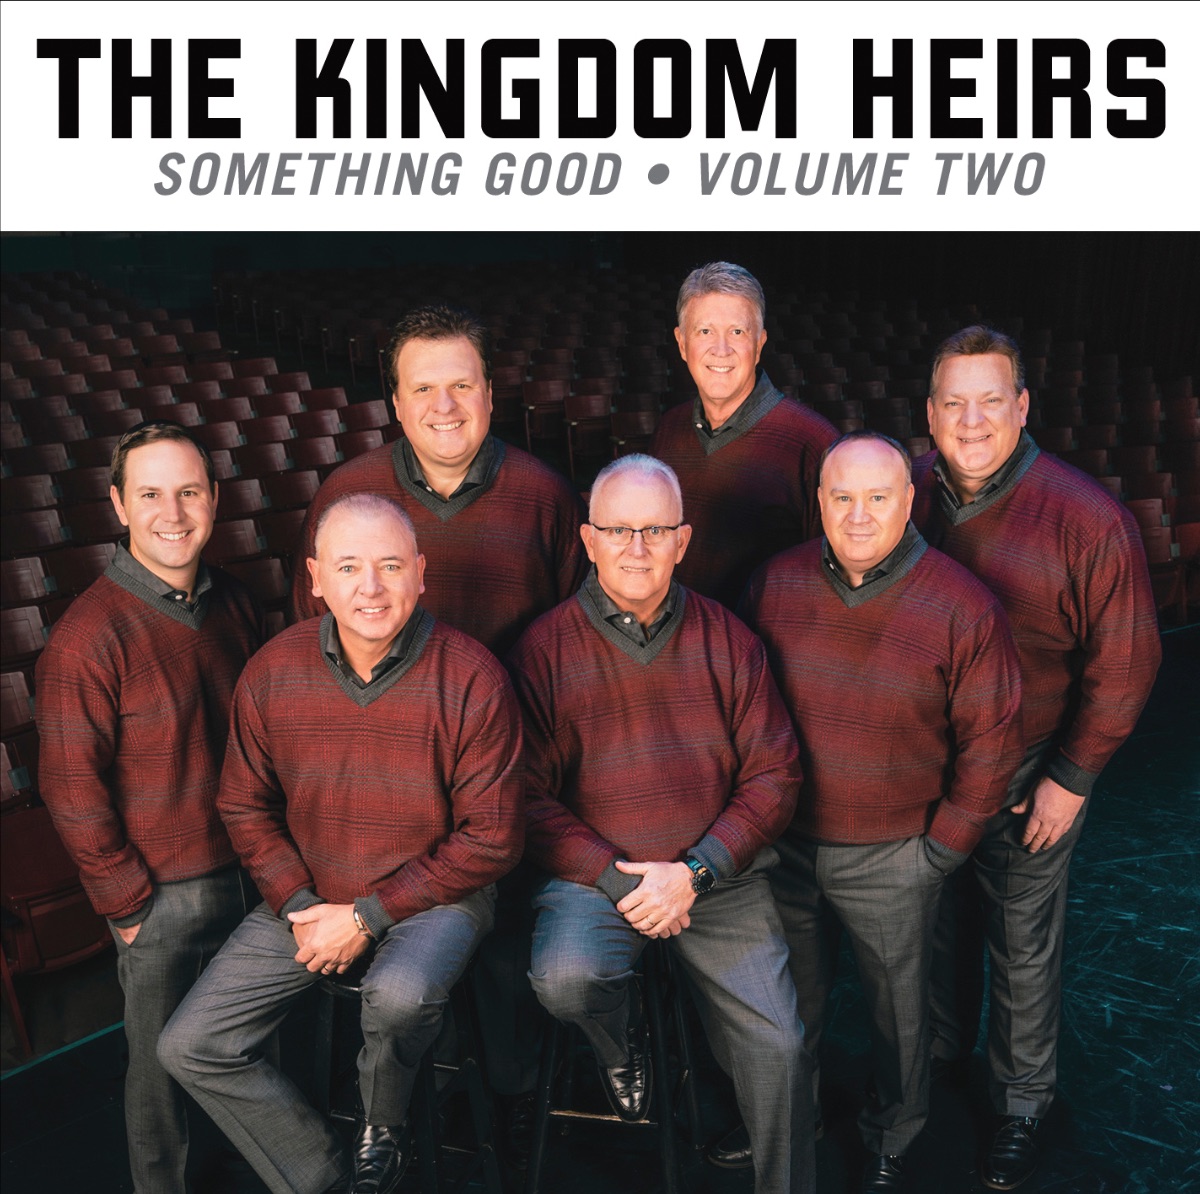 The Kingdom Heirs claim 1 spot on Billboard Chart with Something Good